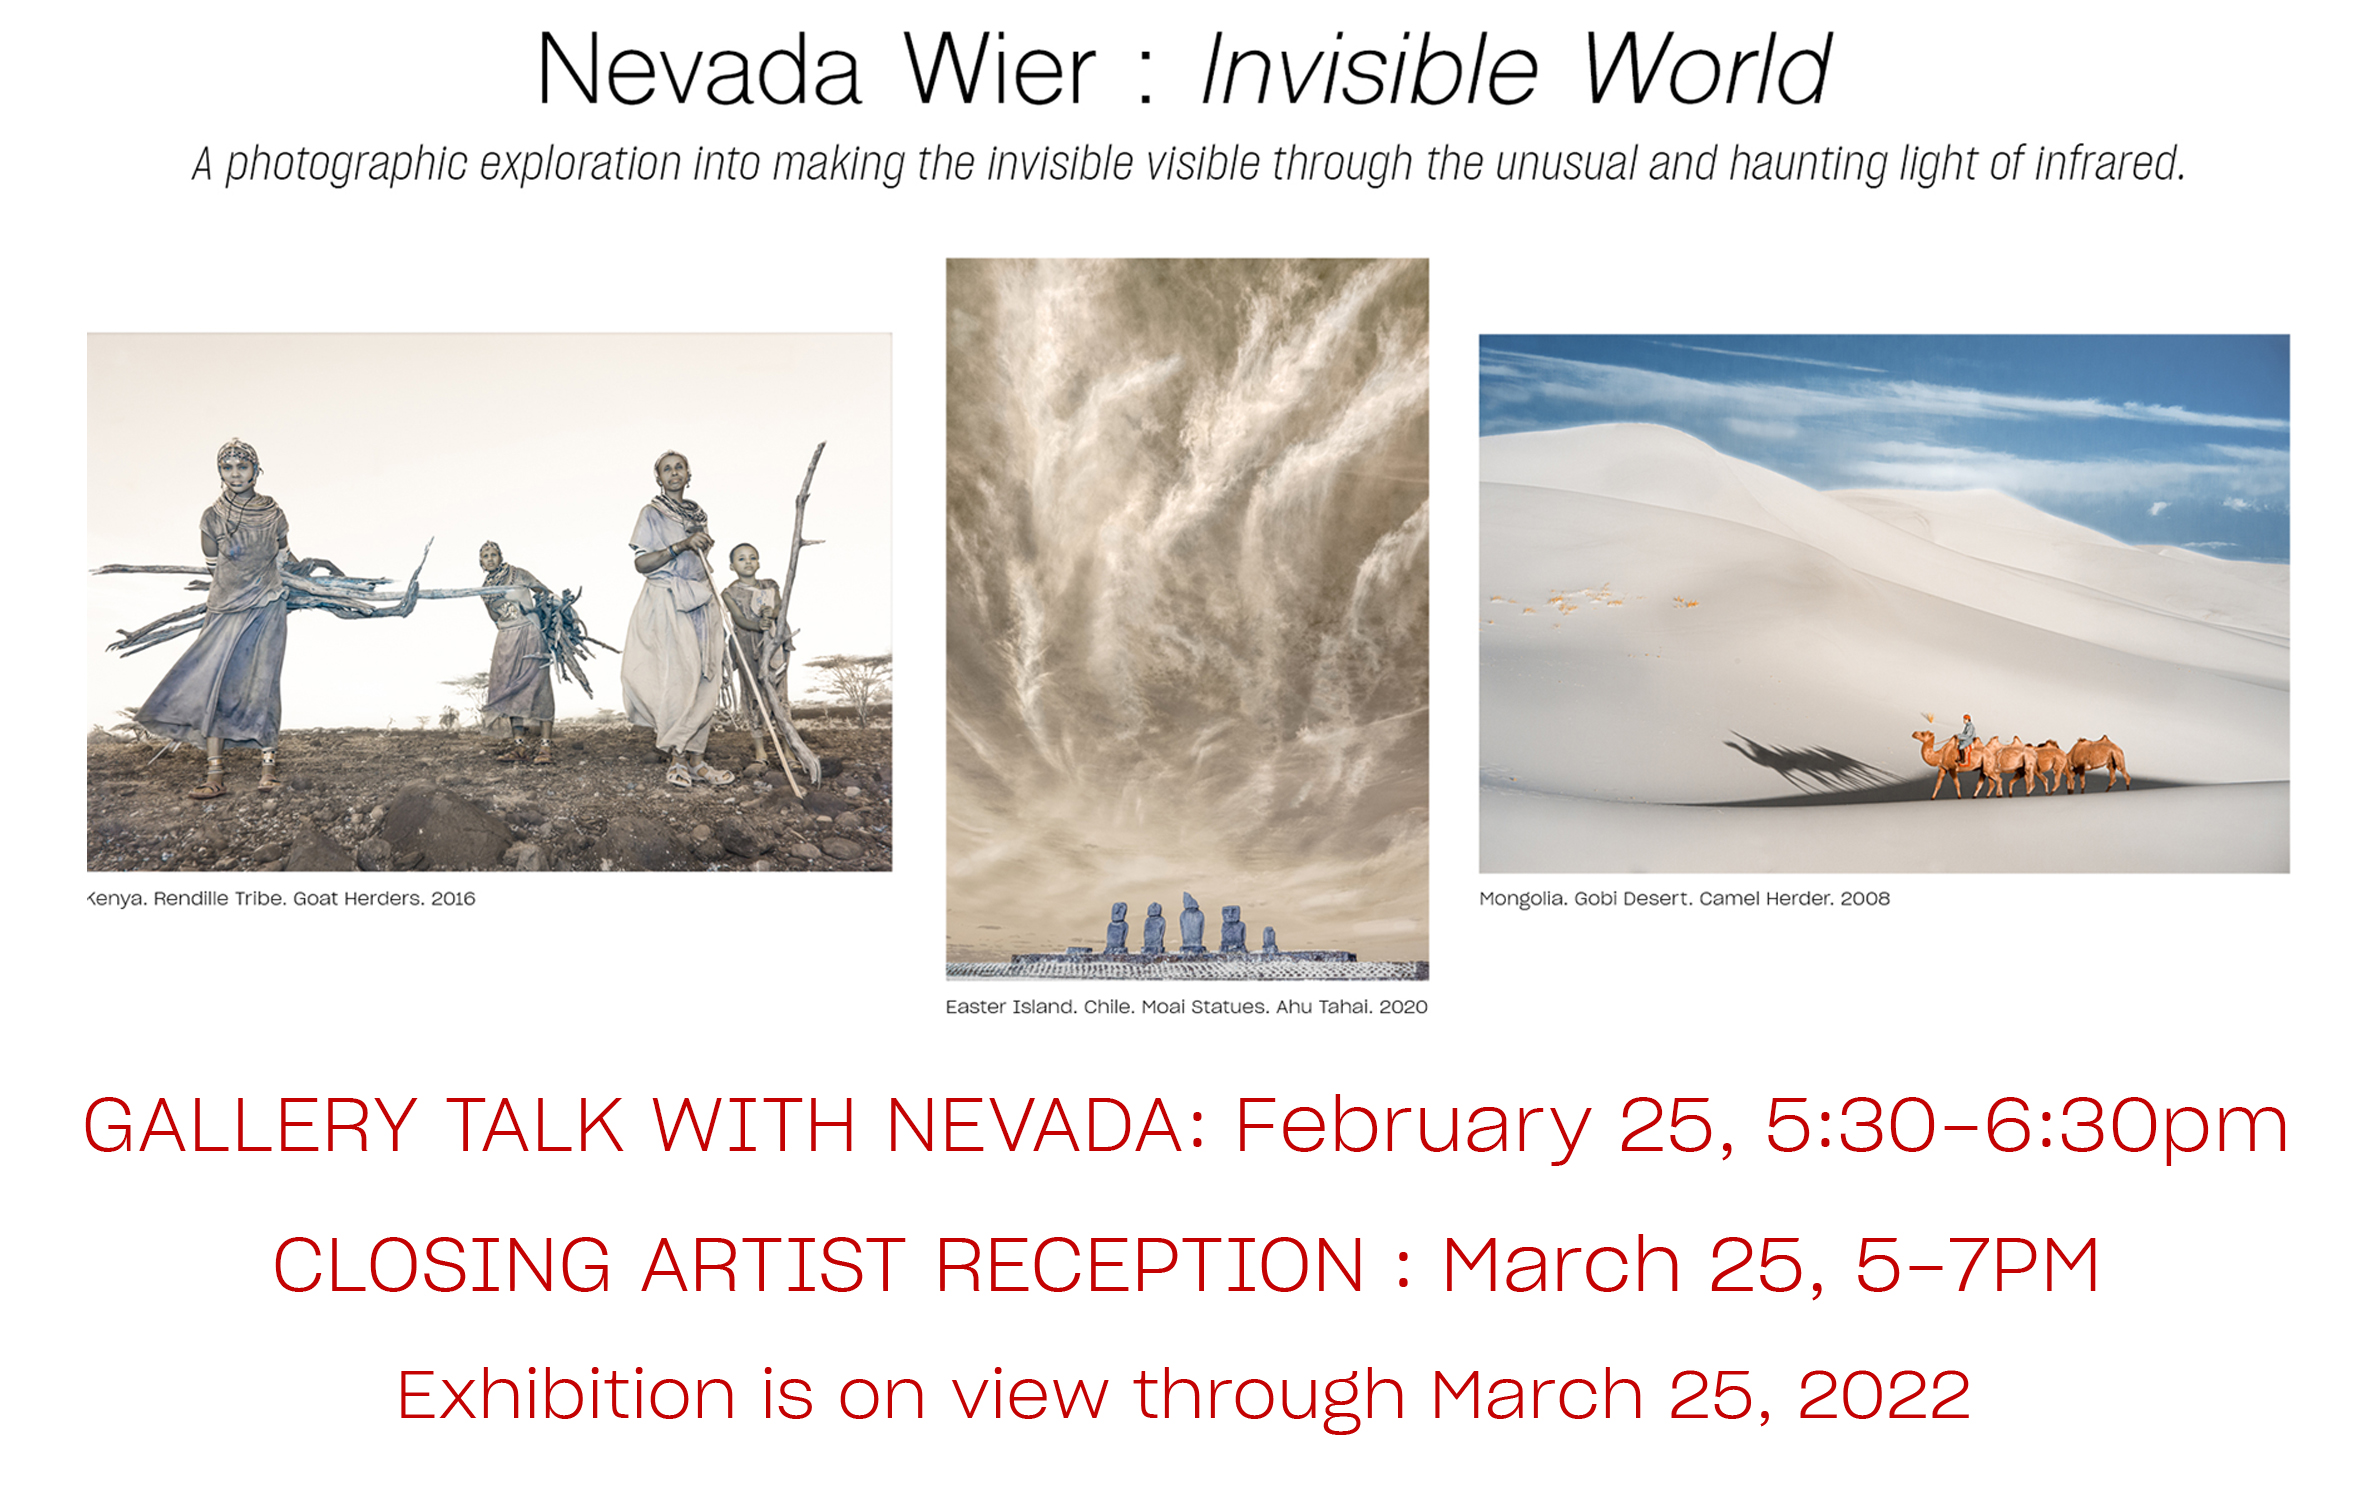 Nevada wier invisible world gallery talk with nevada february 25, 5:30-6:30, closing artist reception, march 25, 5-7pm. exhibition on view through march 25, 2022.